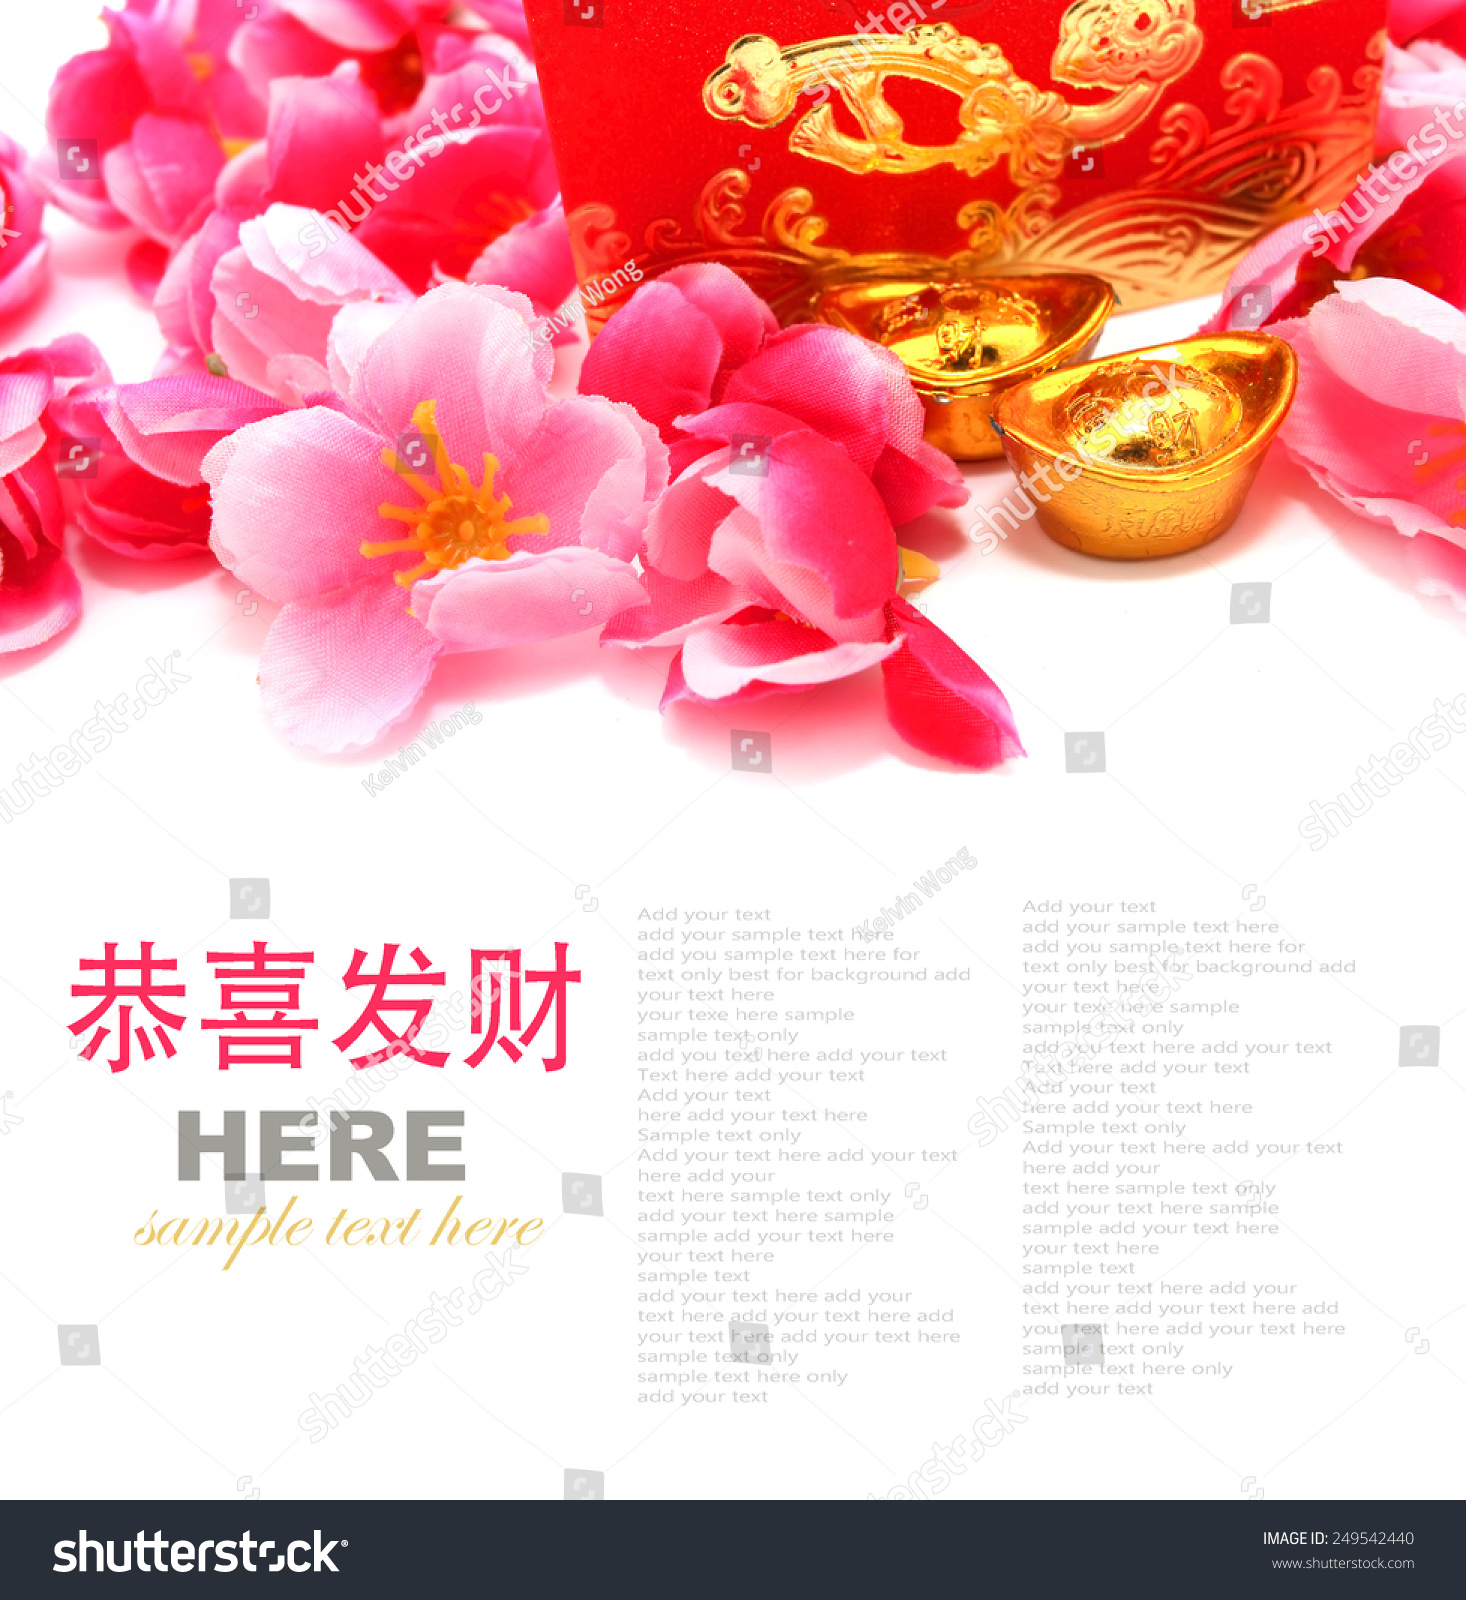 Shoe-shaped gold ingot (Yuan Bao) and Plum Flowers  isolated on white with copy space - best for Chinese New Year use #249542440